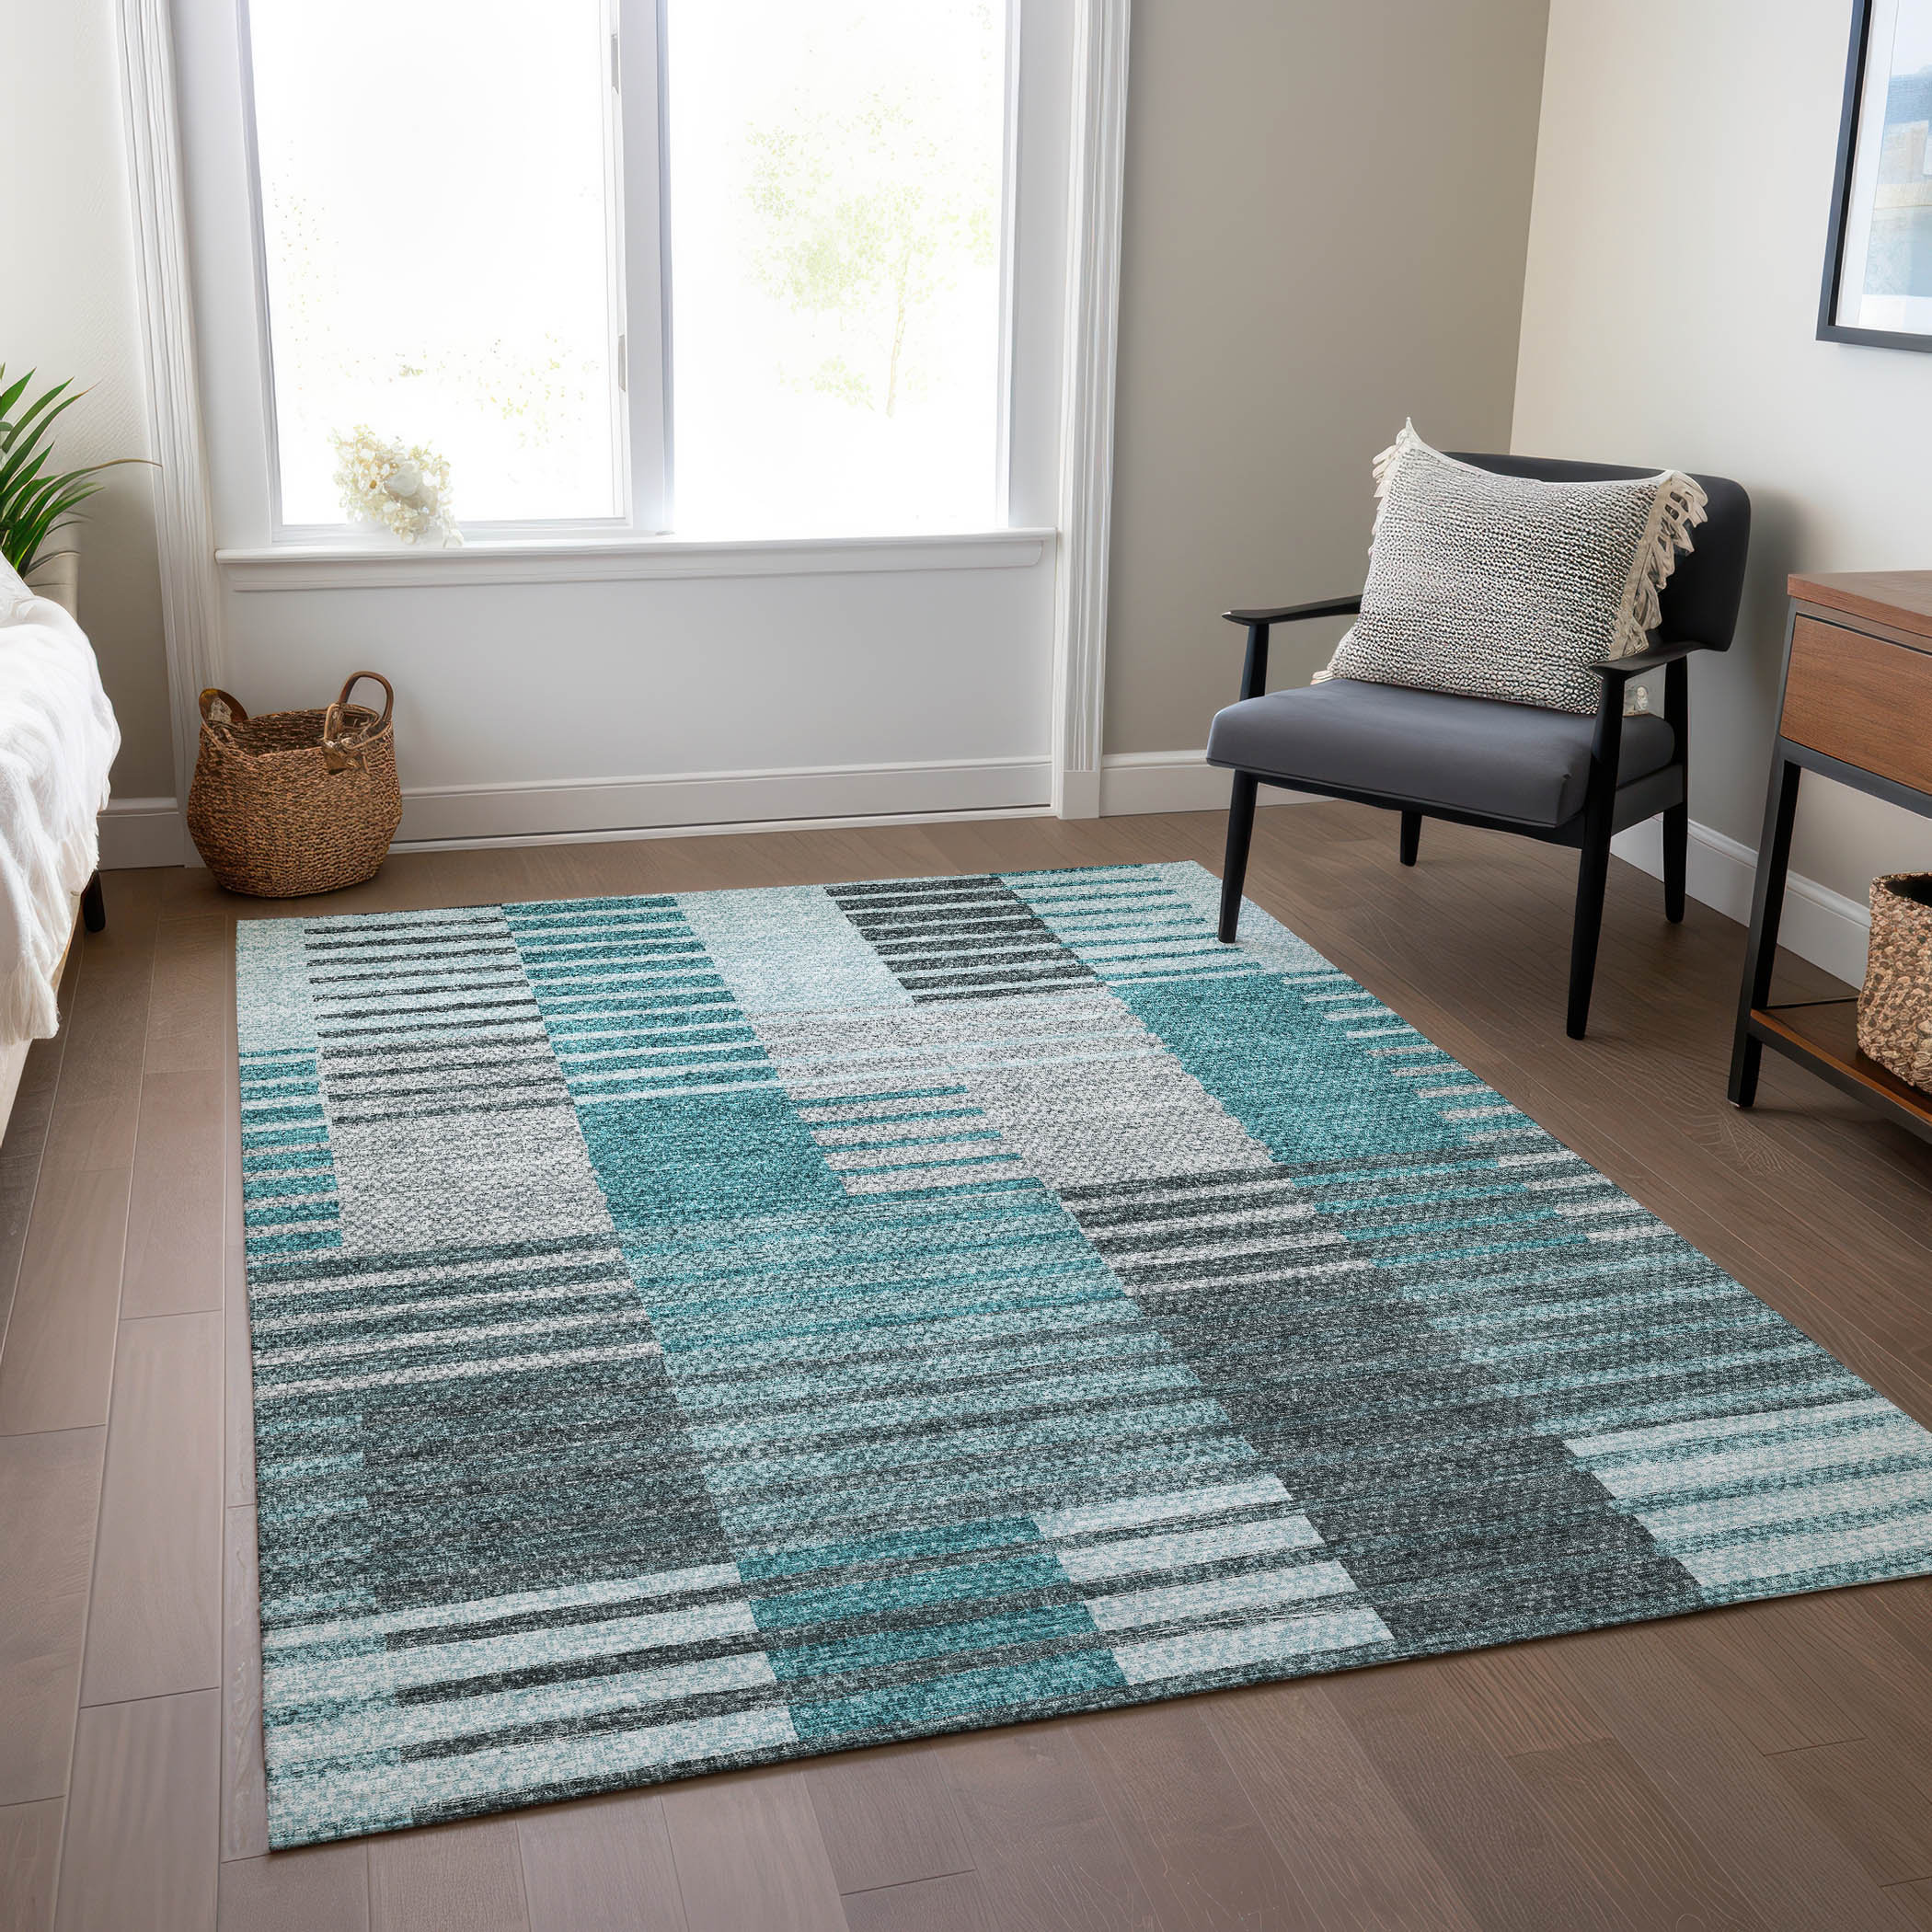 RugBuddy® Under Rug Heater – Rugs and Stuff